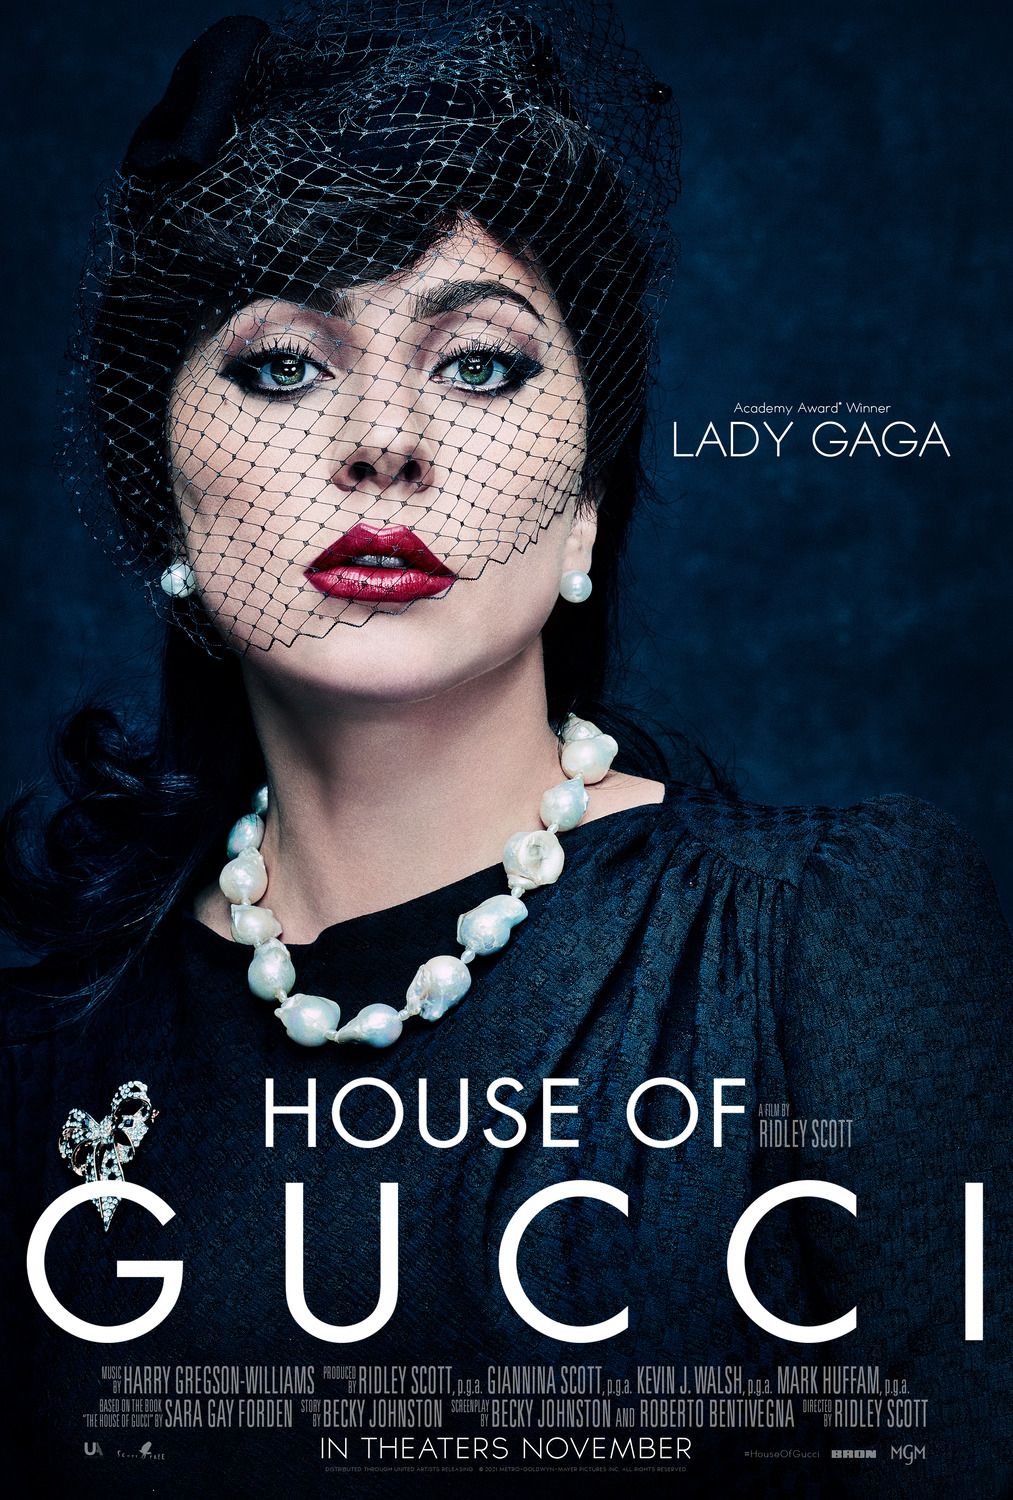 House of Gucci poster #2 Lady Gaga